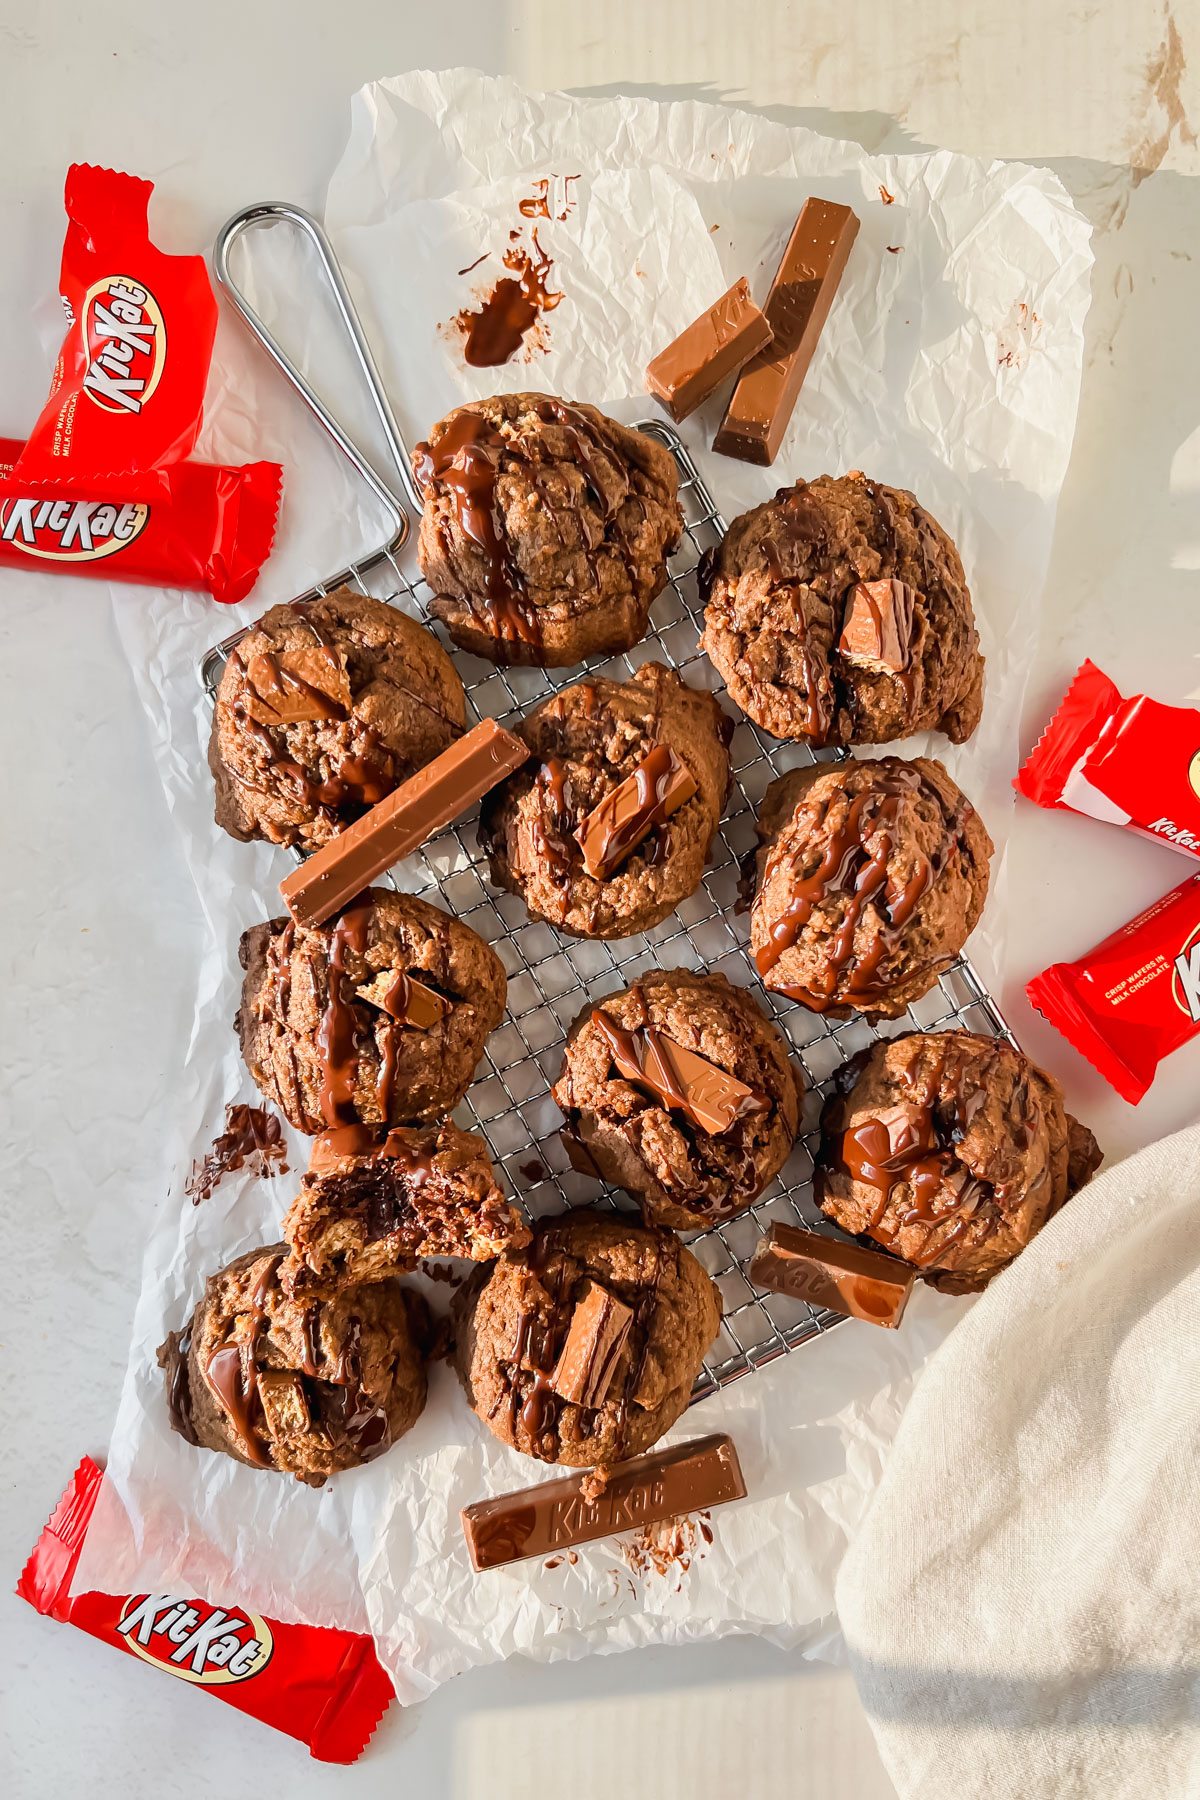 baked kit kat cookies on cooling rack on top of parchment paper with additional kit kats and kit kat wrappers scattered around.